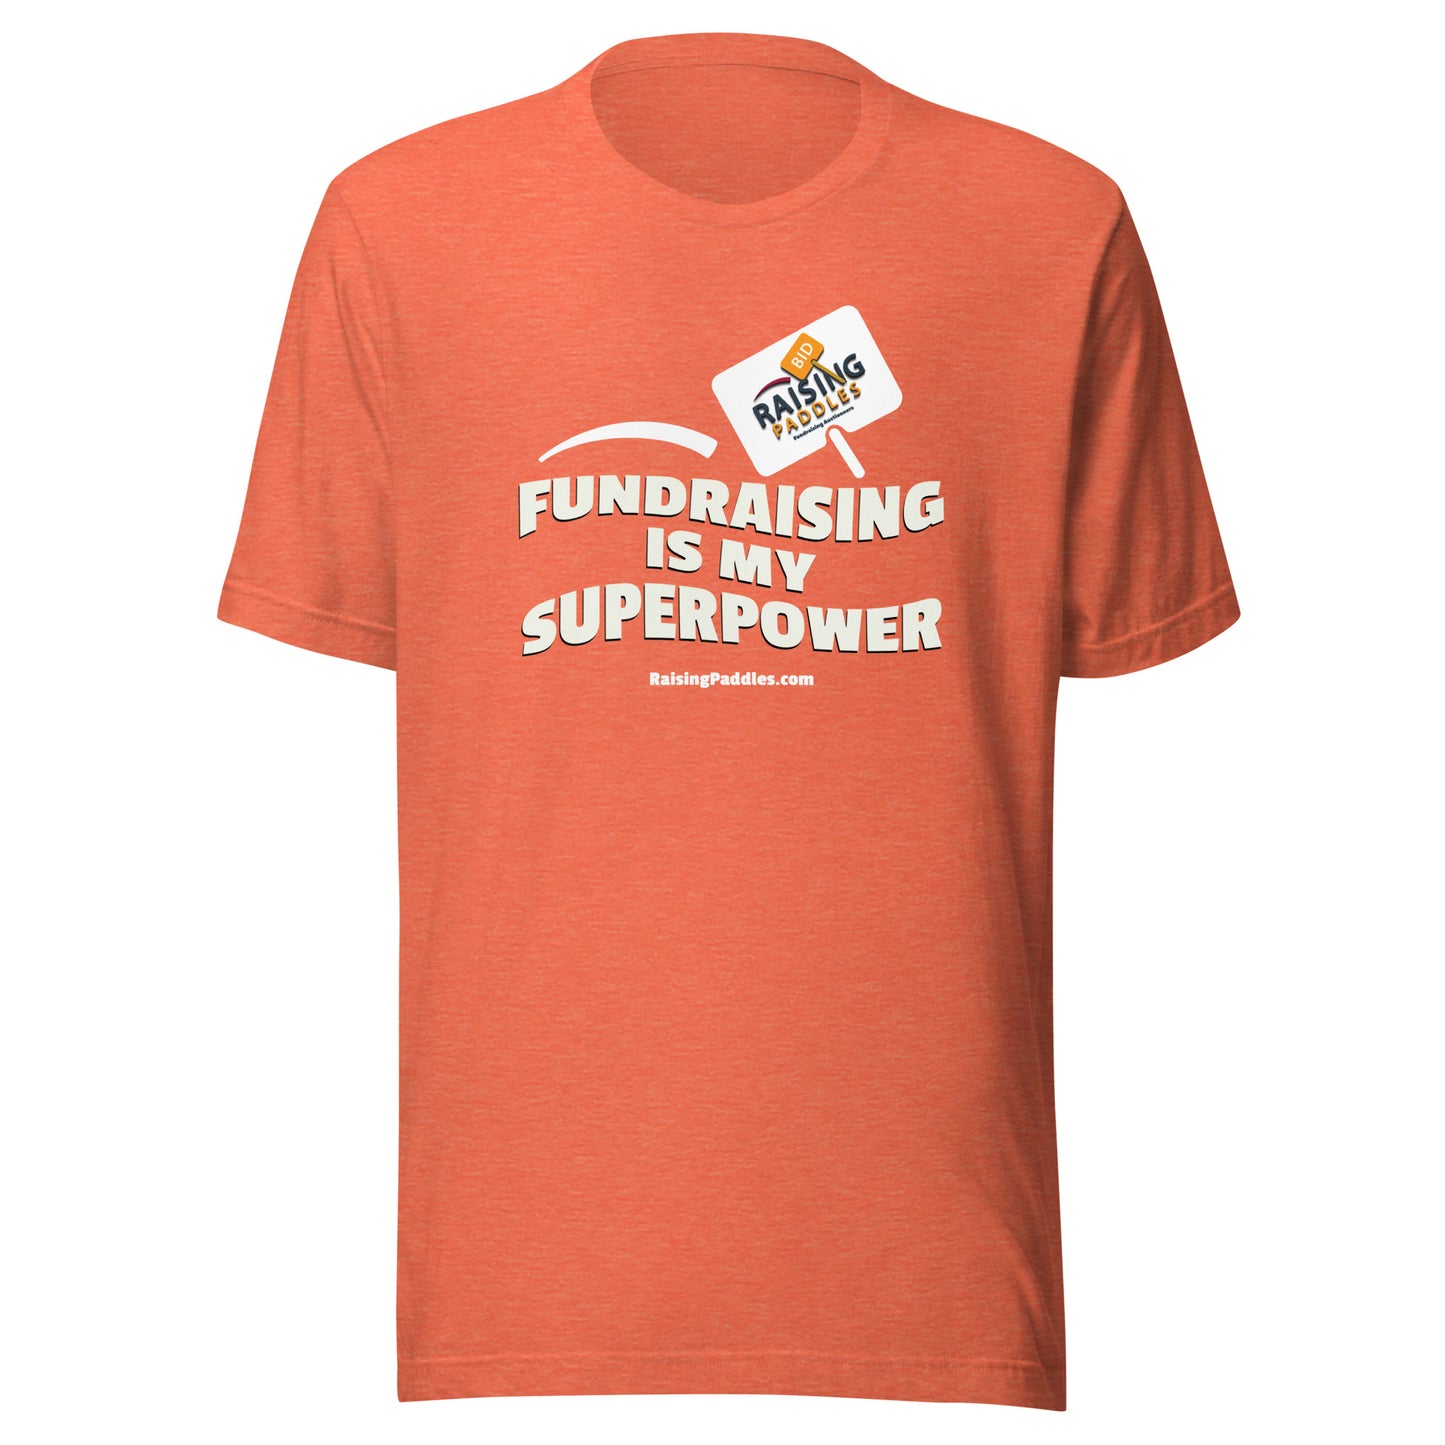 Fundraising Is My Superpower t-shirt